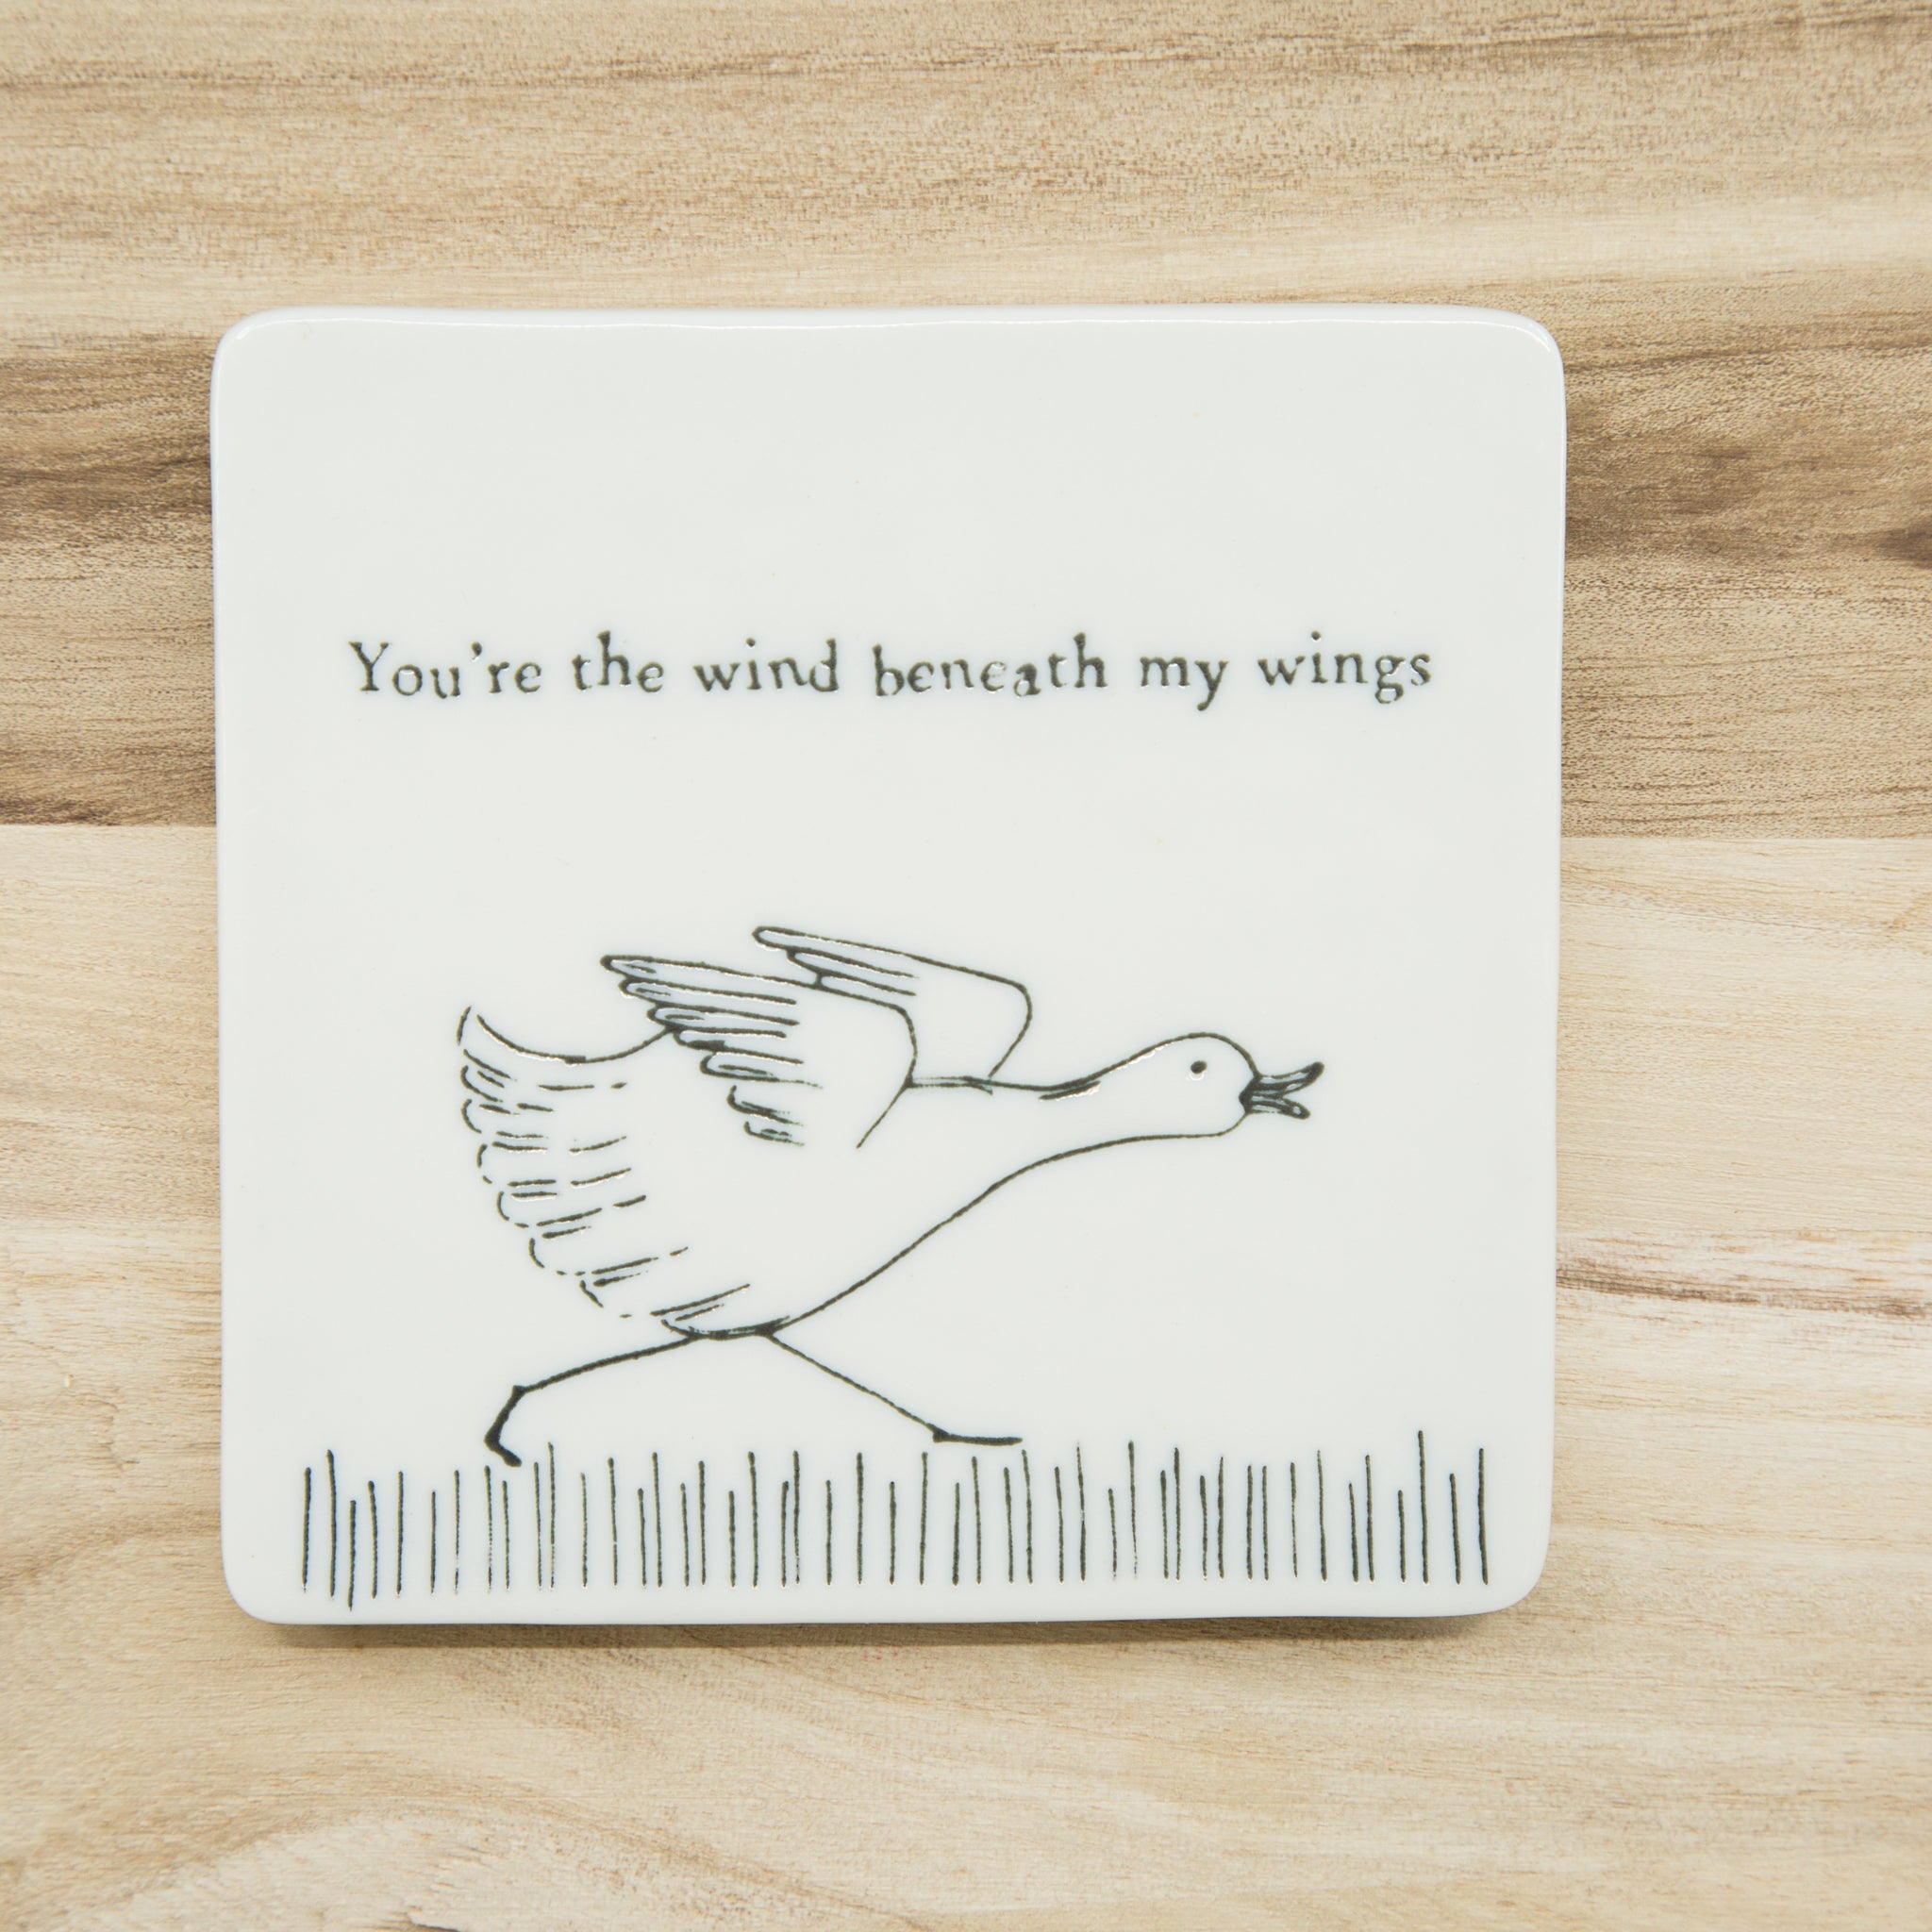 You're the wind beneath my wings - Porcelain Coaster